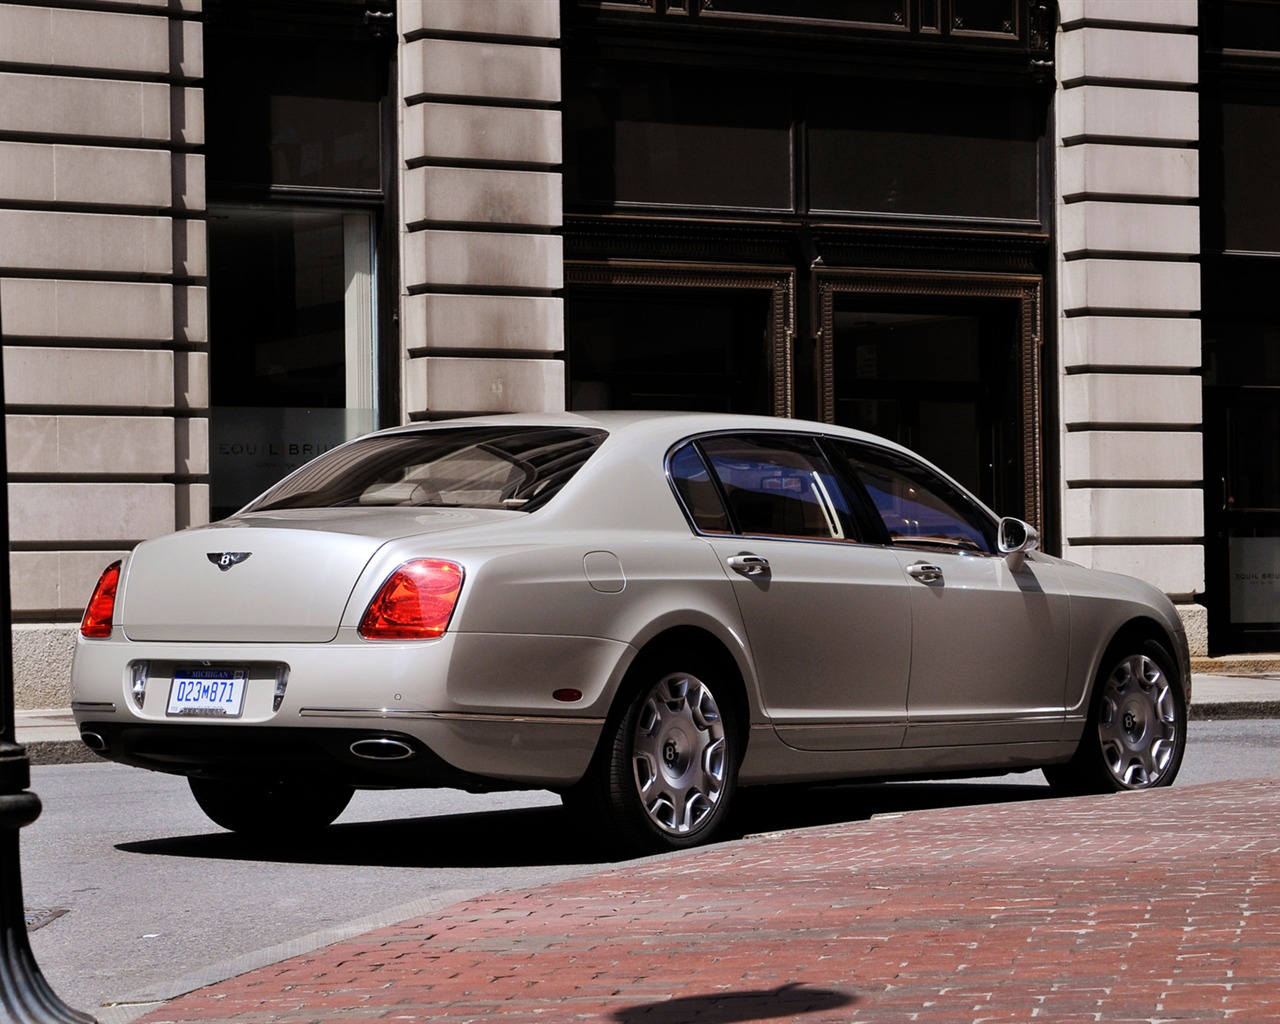 Bentley Continental Flying Spur - 2008 宾利9 - 1280x1024